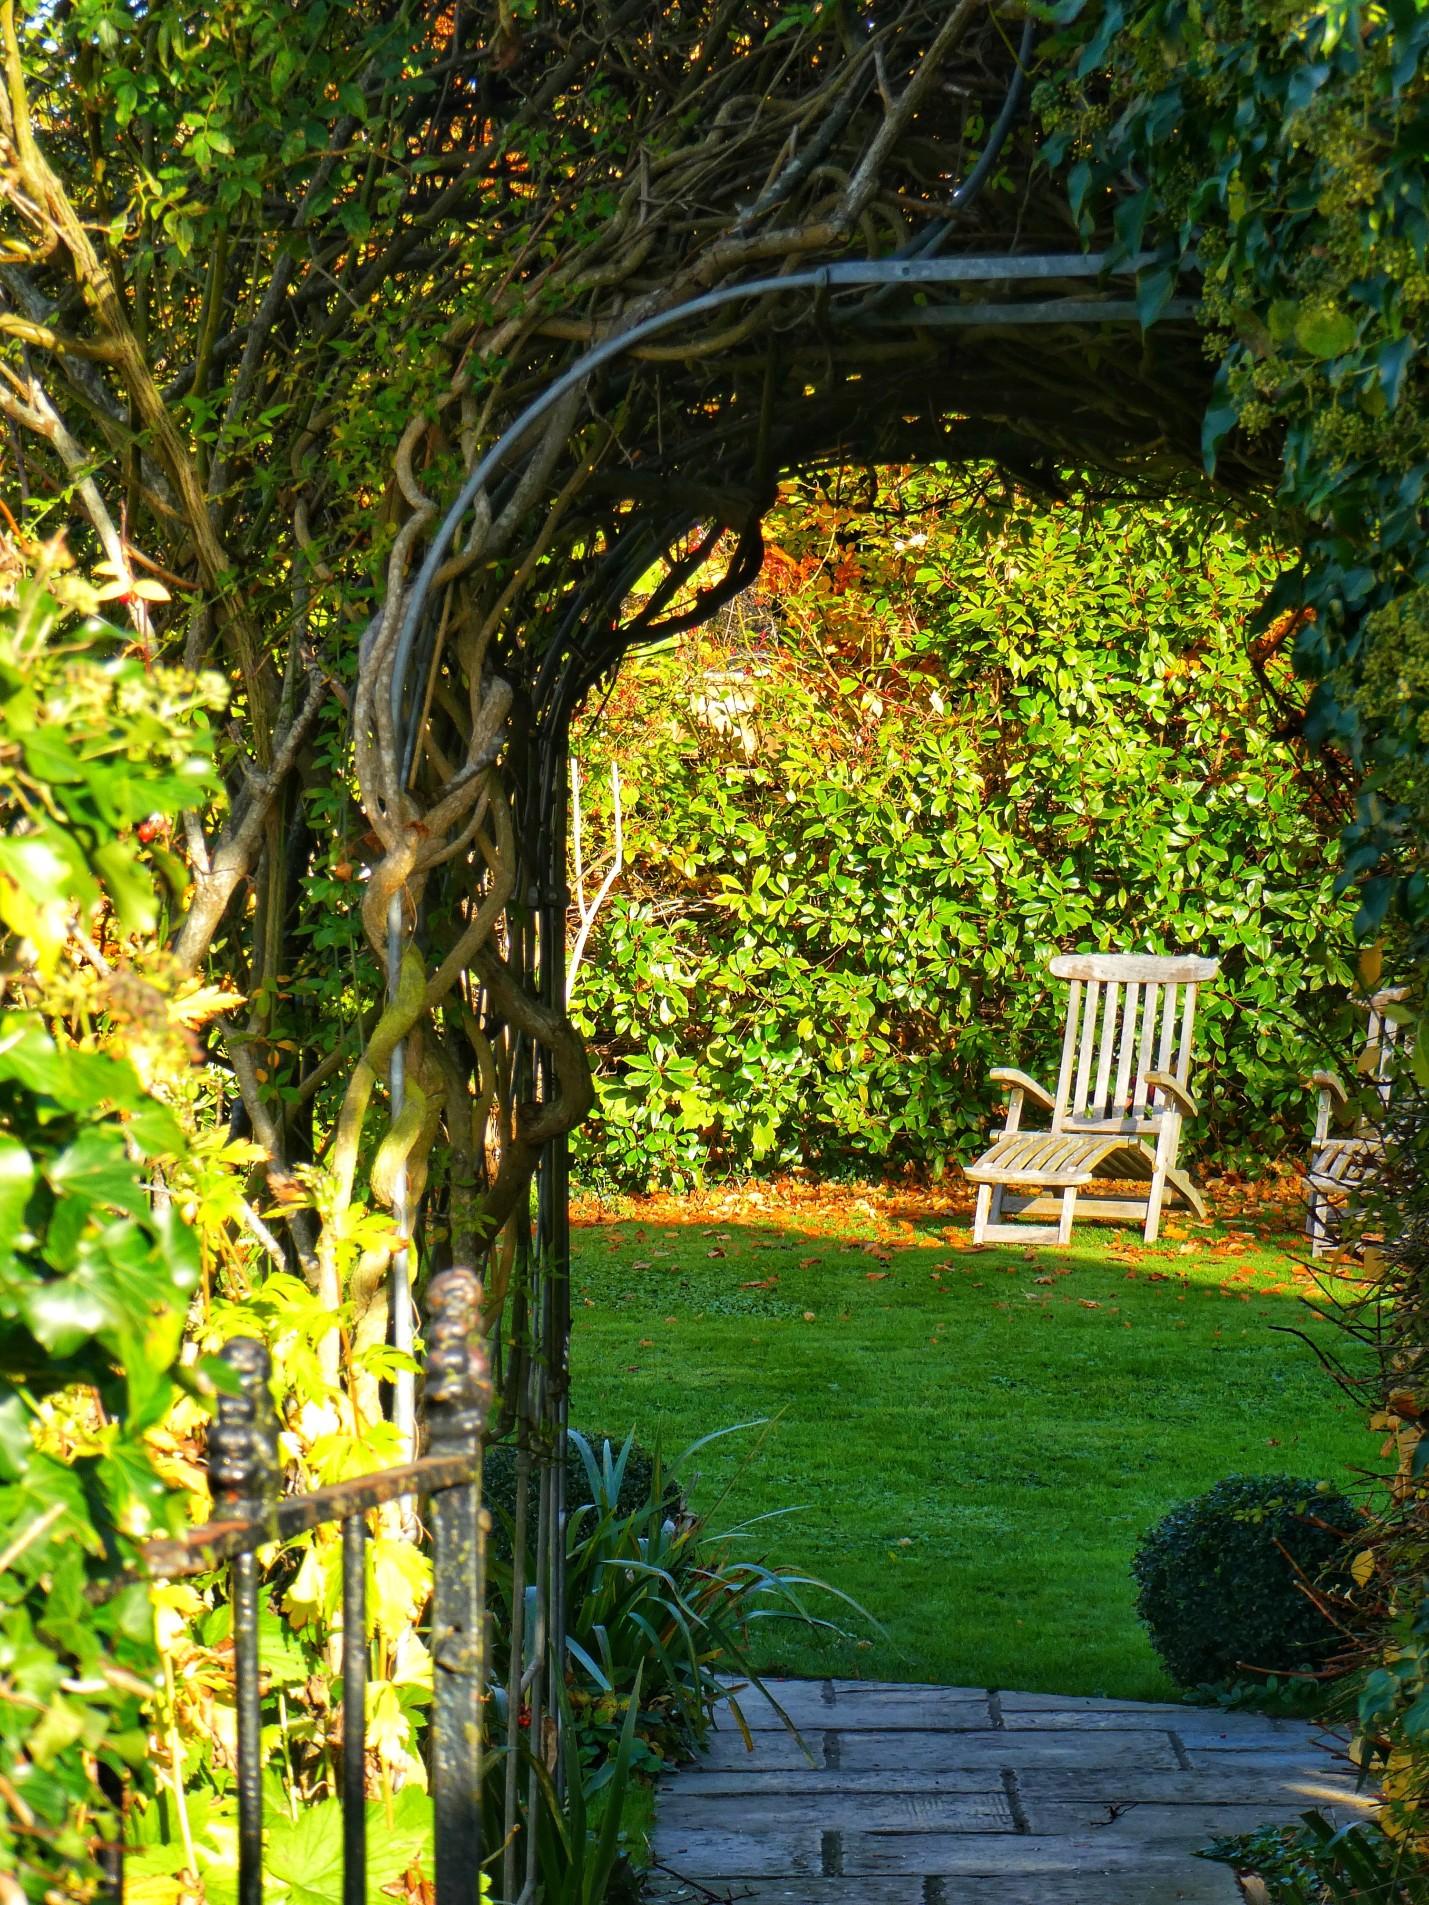 Garden arch full of vines and lush greenery